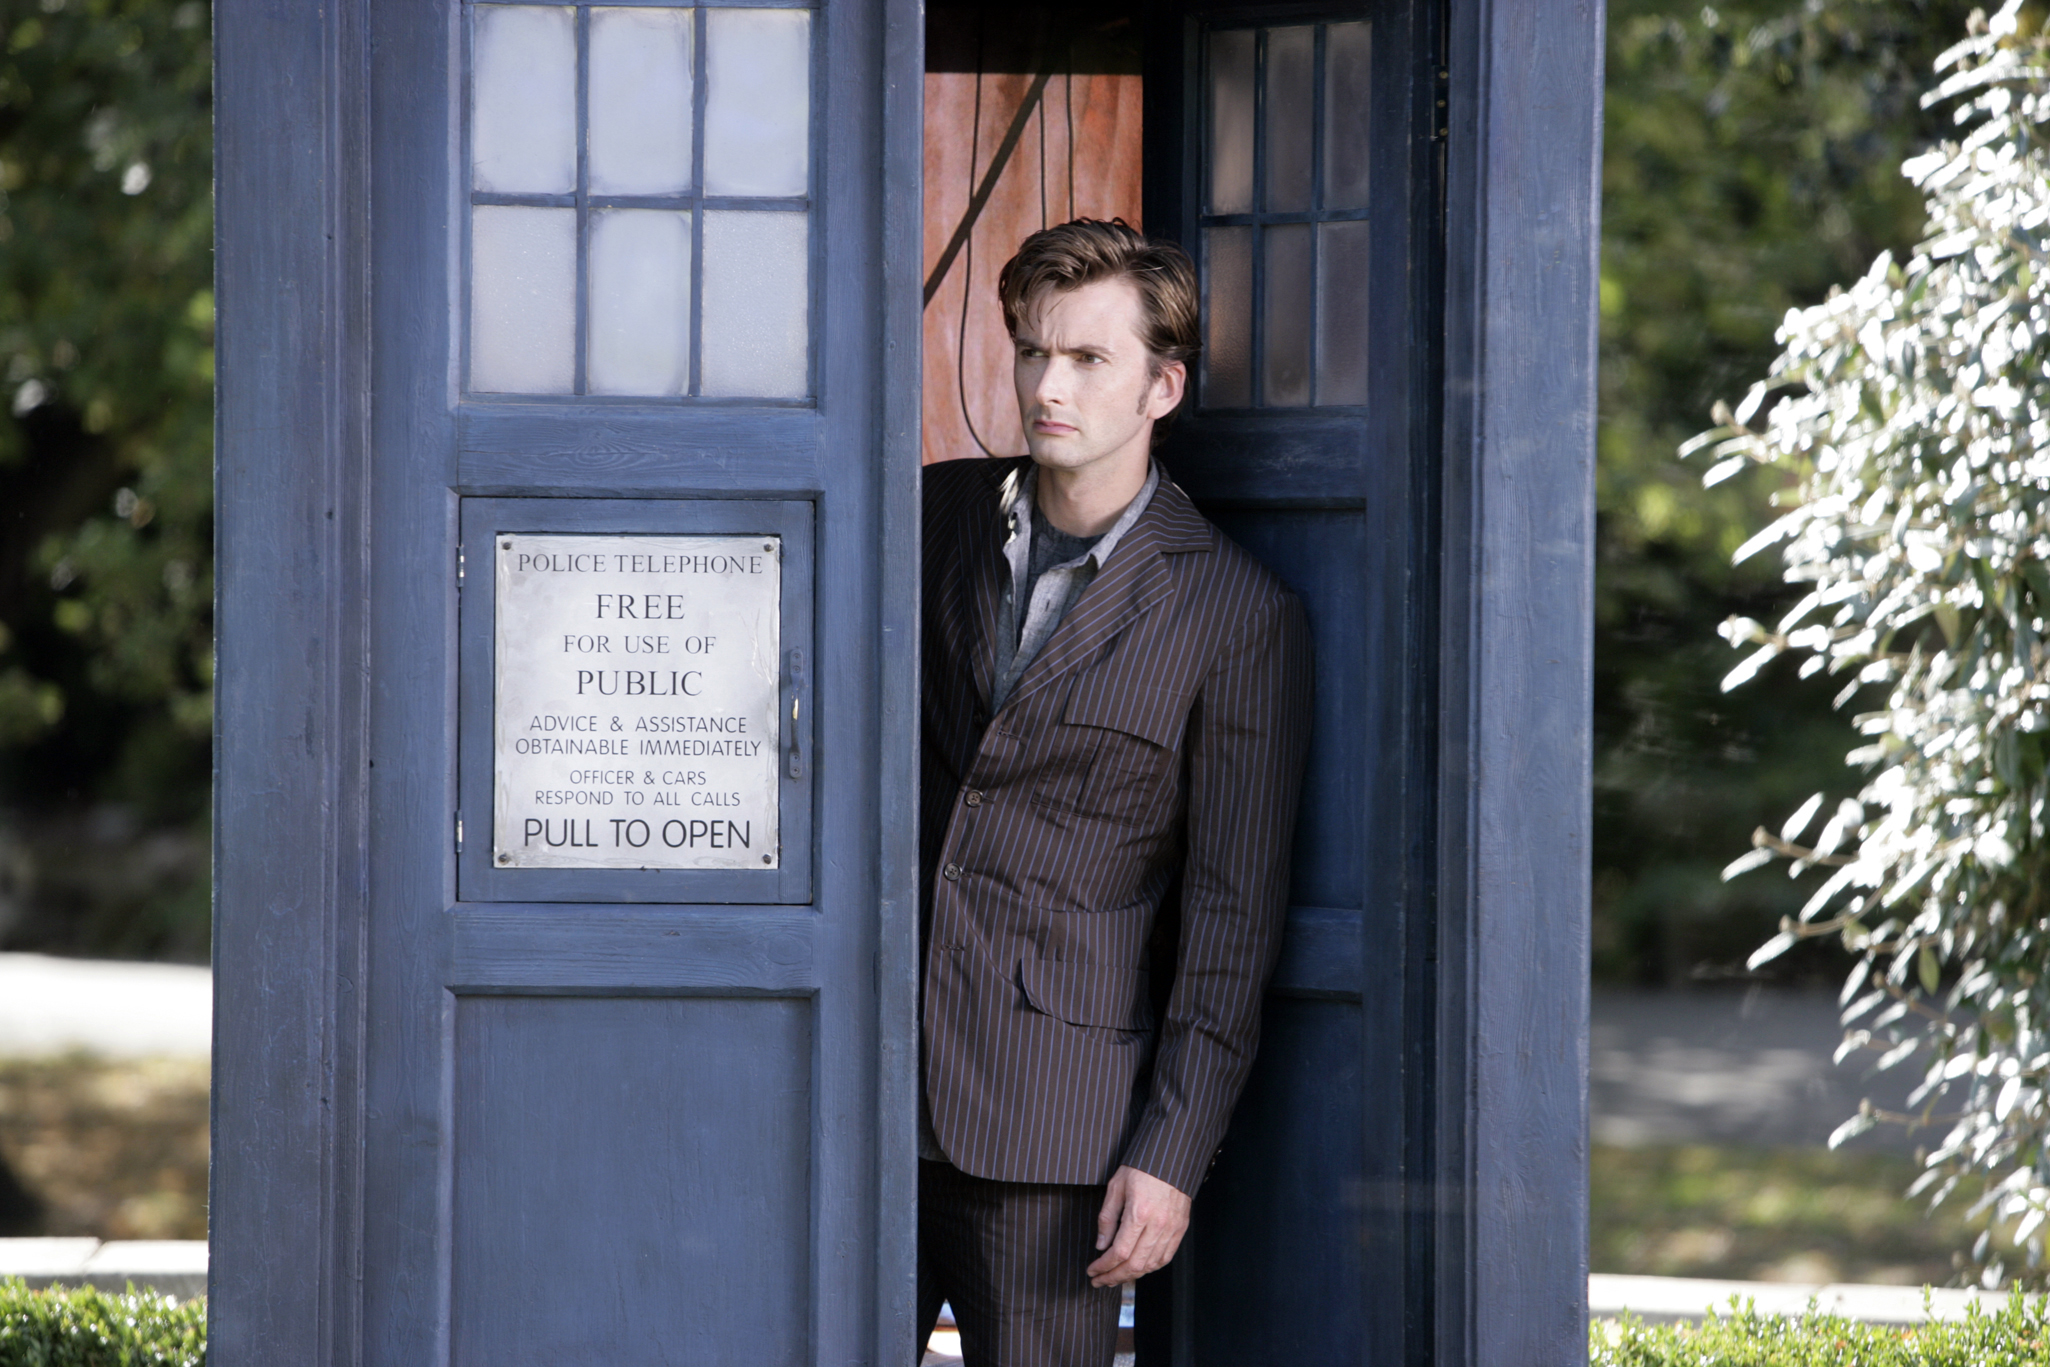 tardis, doctor who, tv show lock screen backgrounds